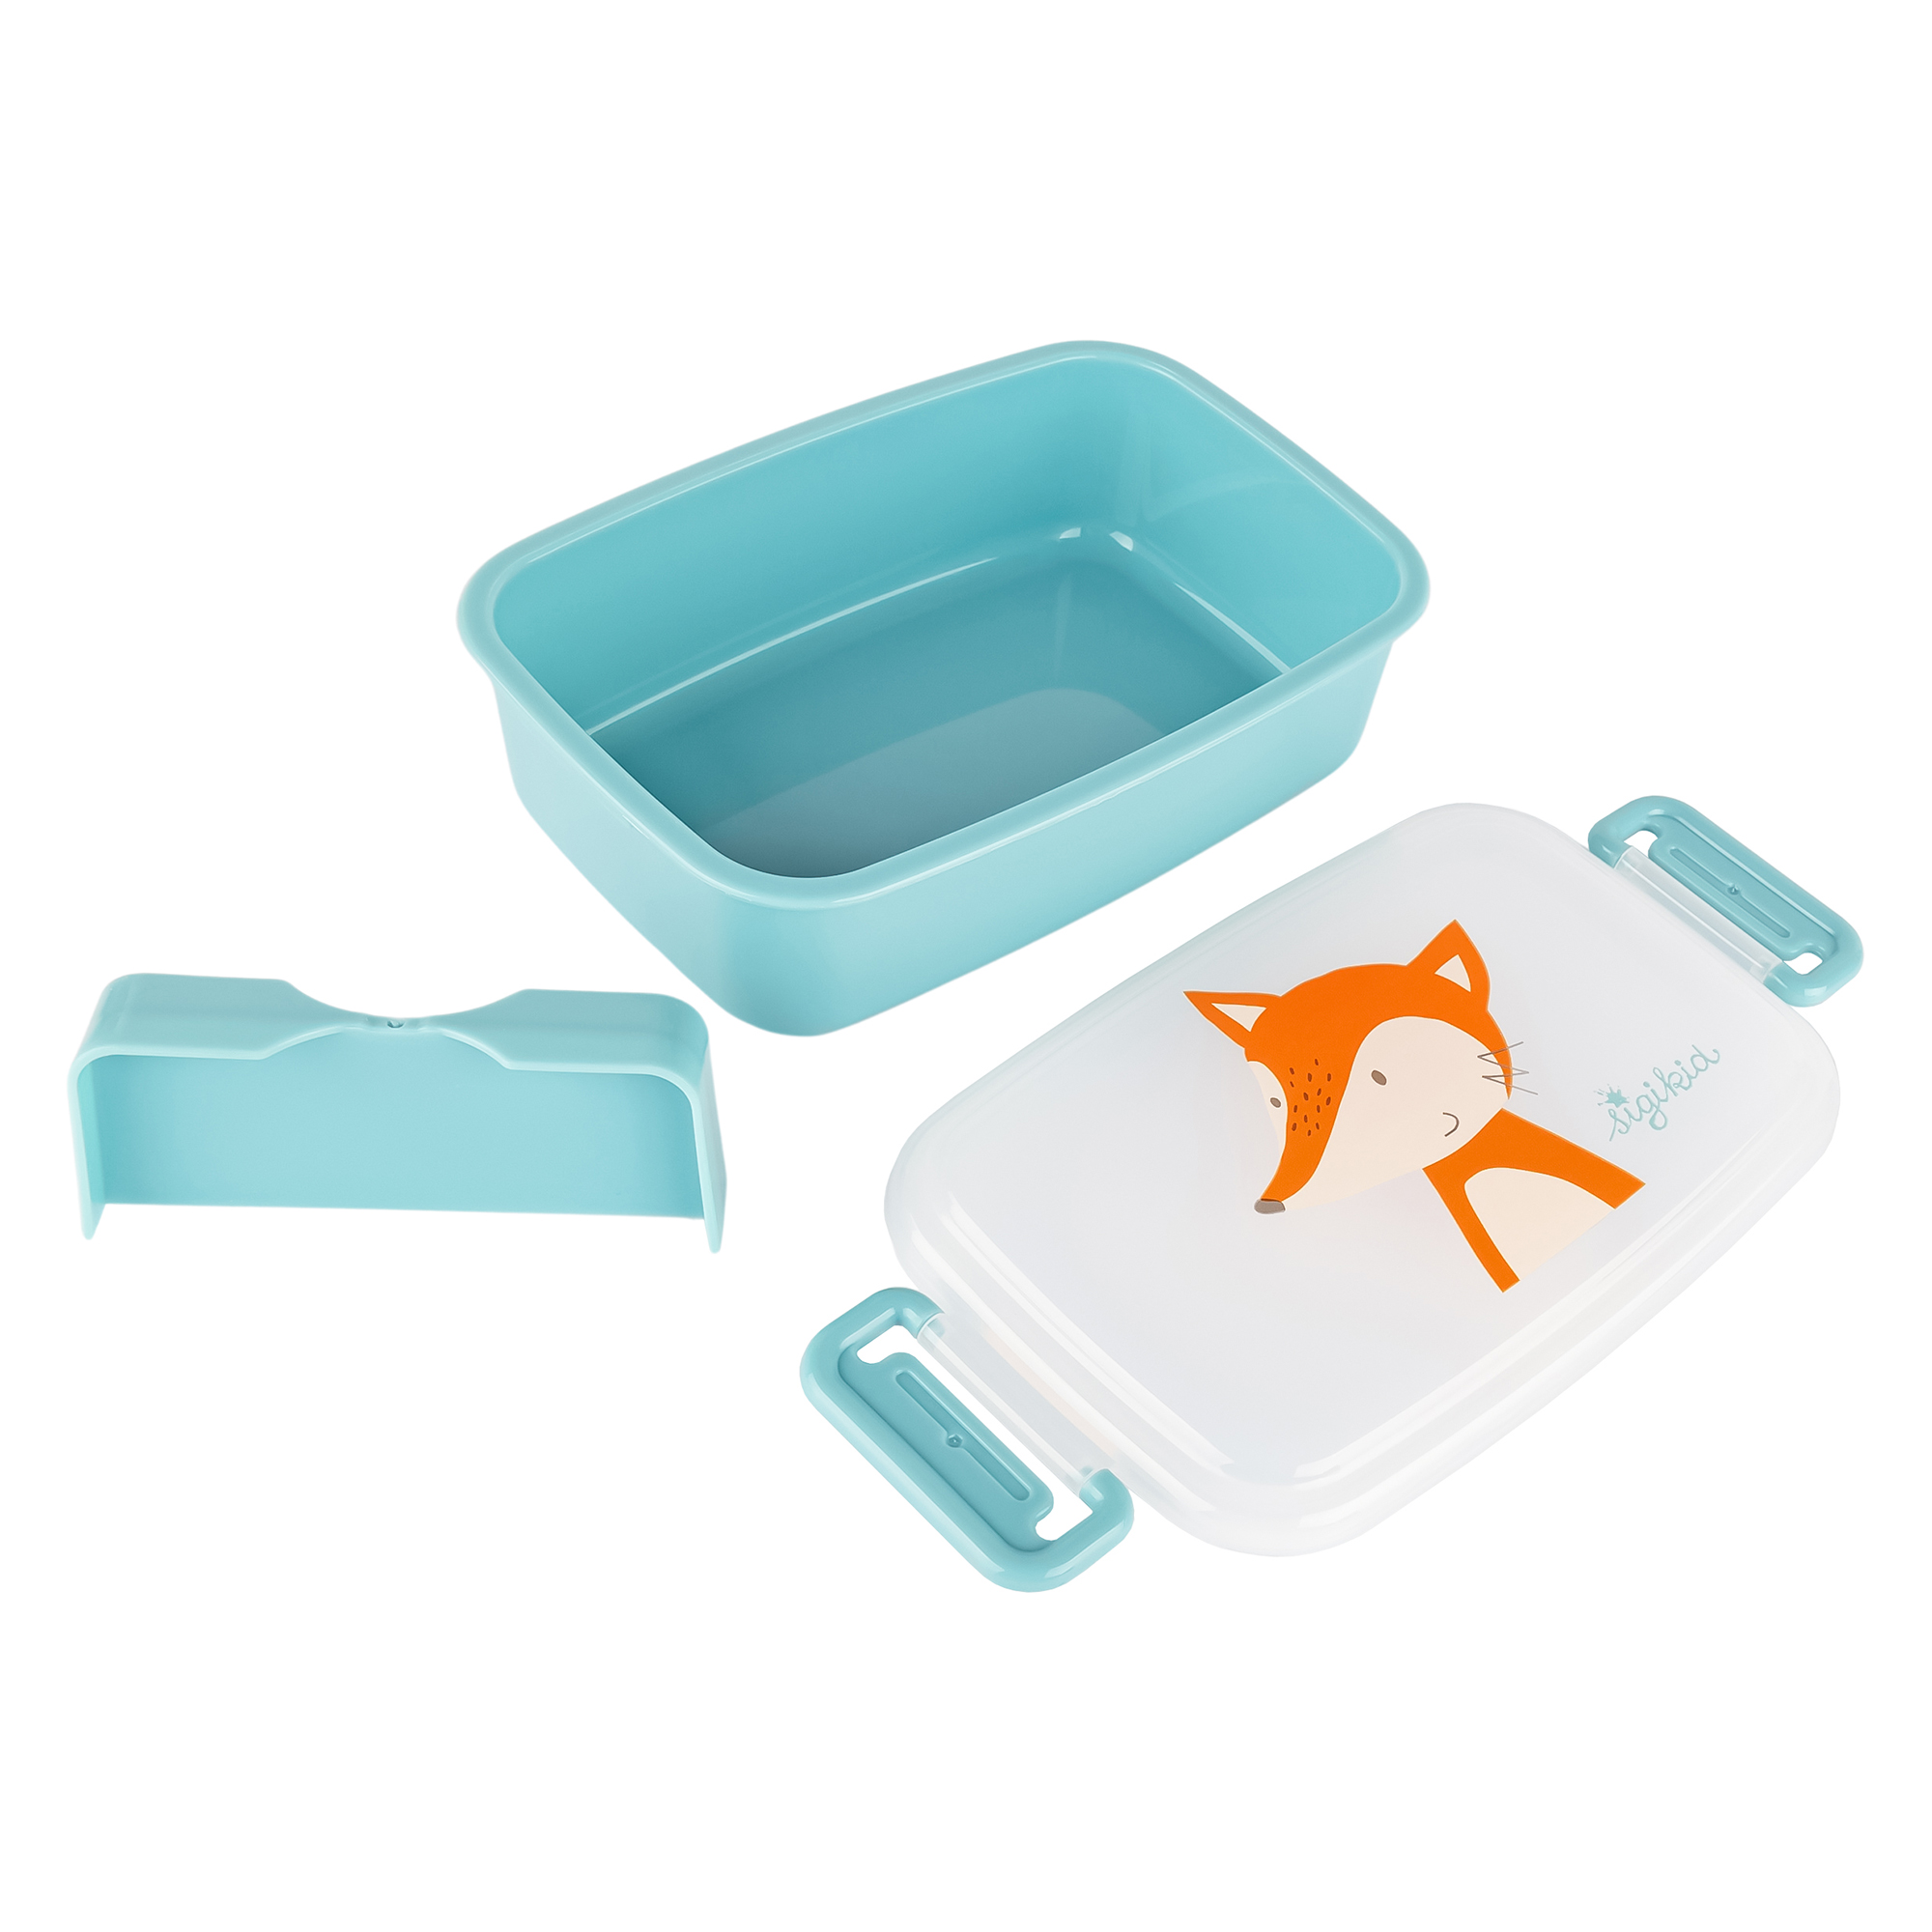 Lunchbox fox, removable partition inside